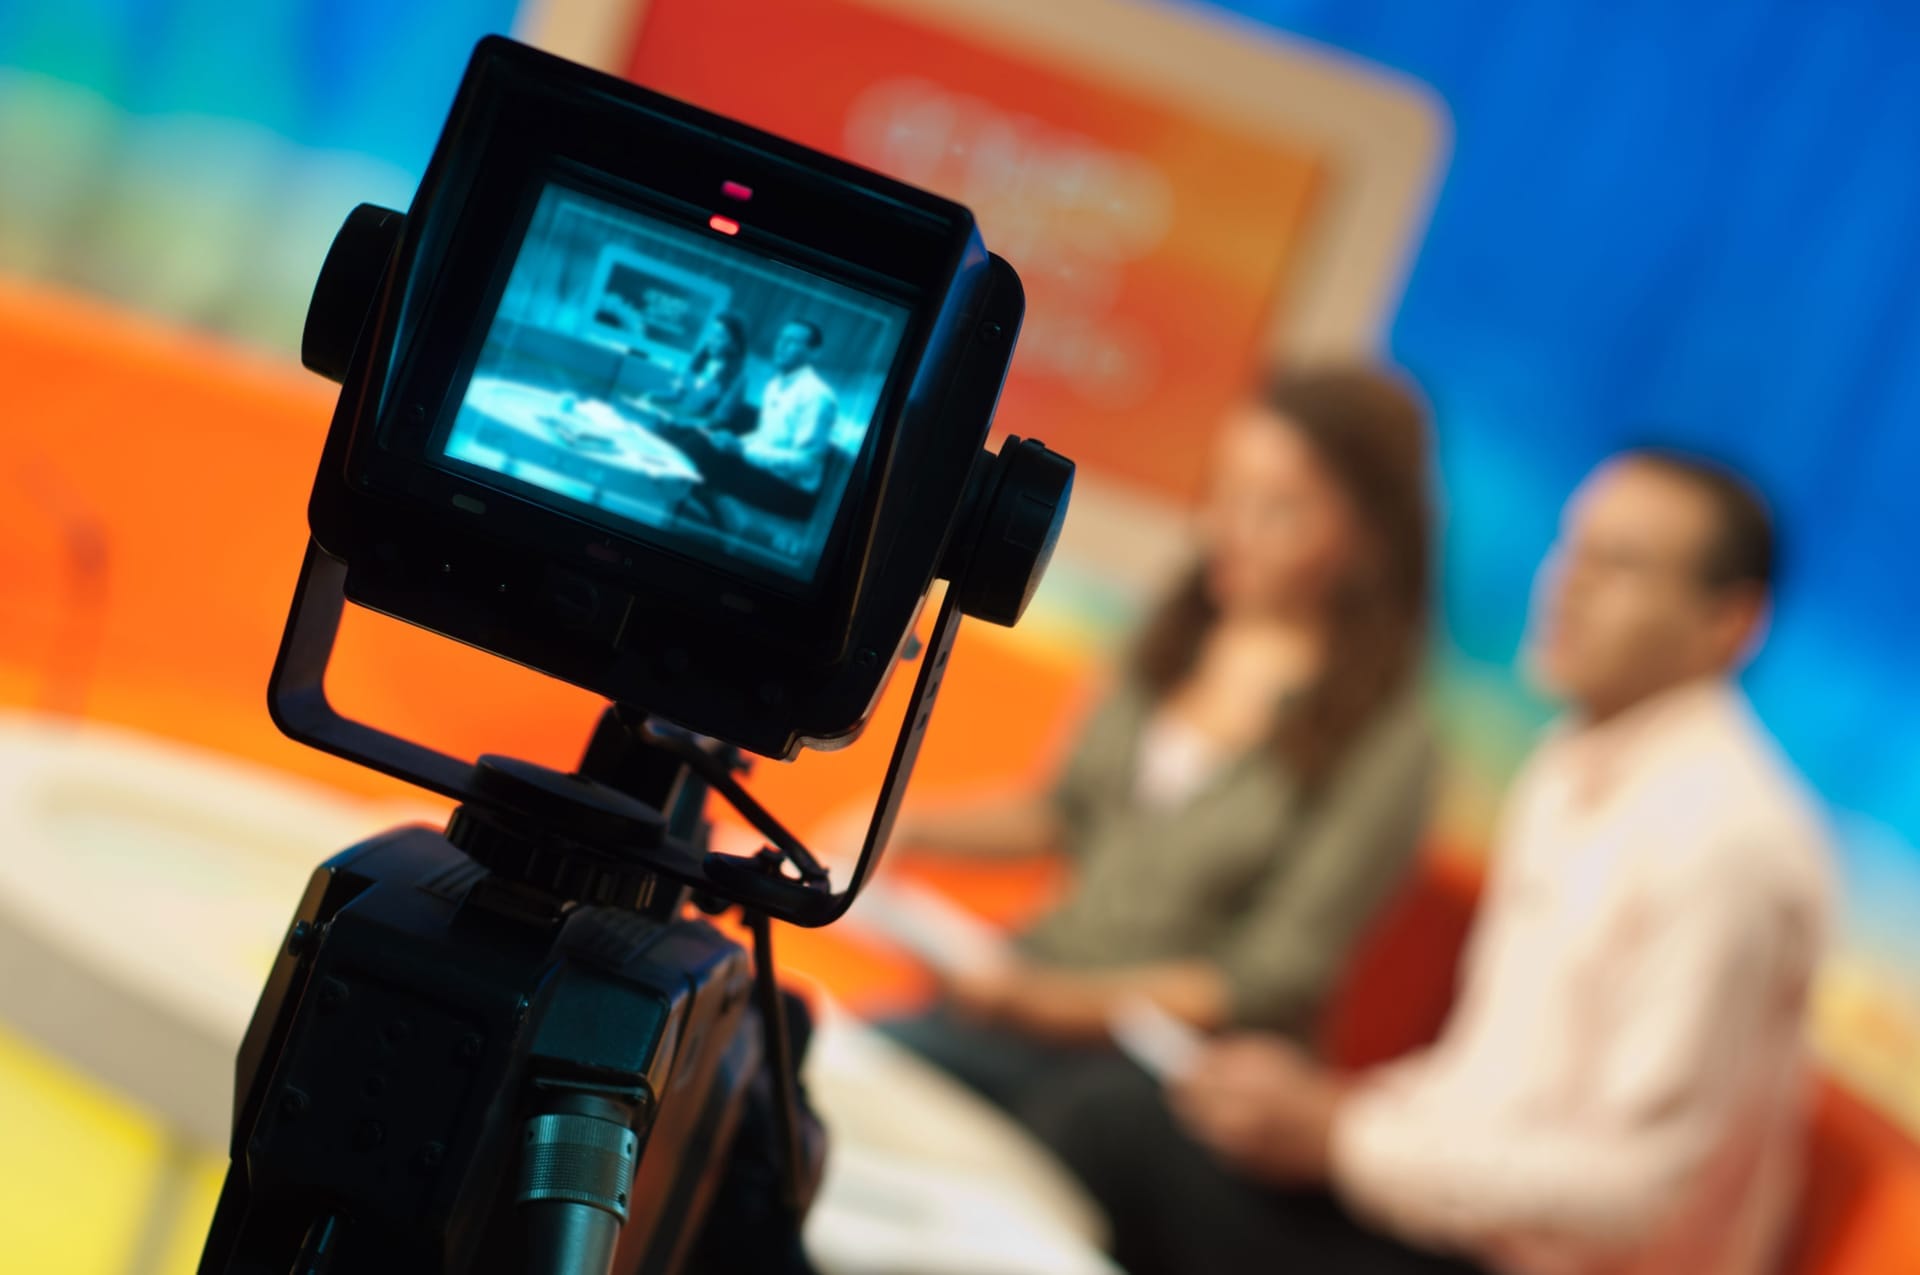 How To Find Work As A TV Presenter